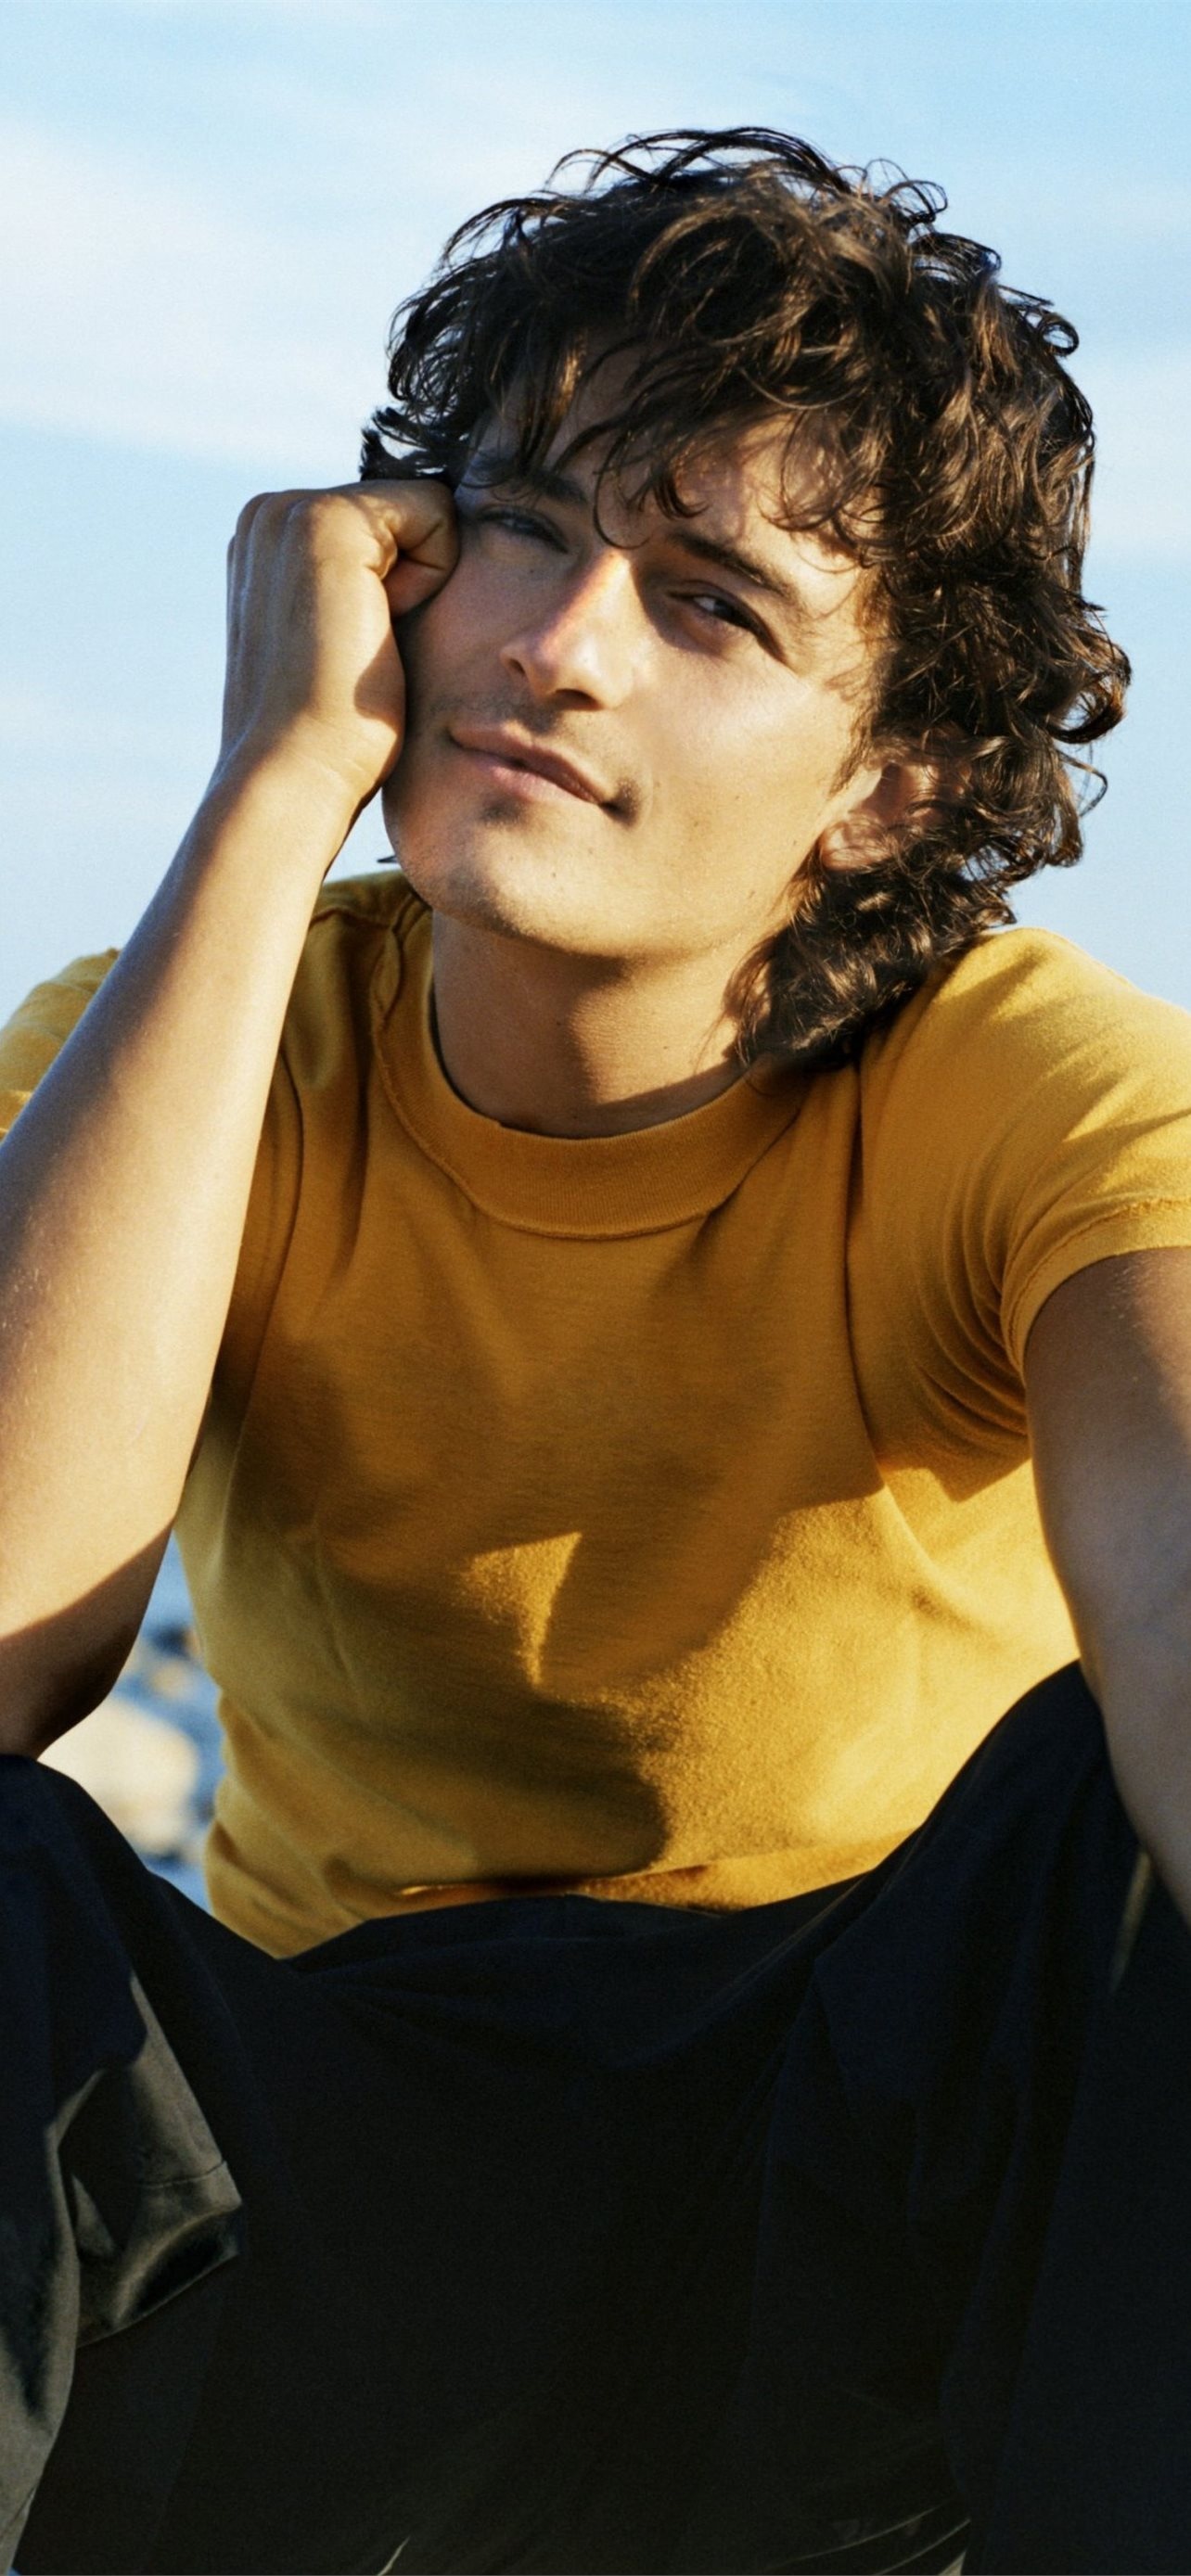 Orlando Bloom, iPhone wallpapers, Free download, High-quality images, 1290x2780 HD Handy